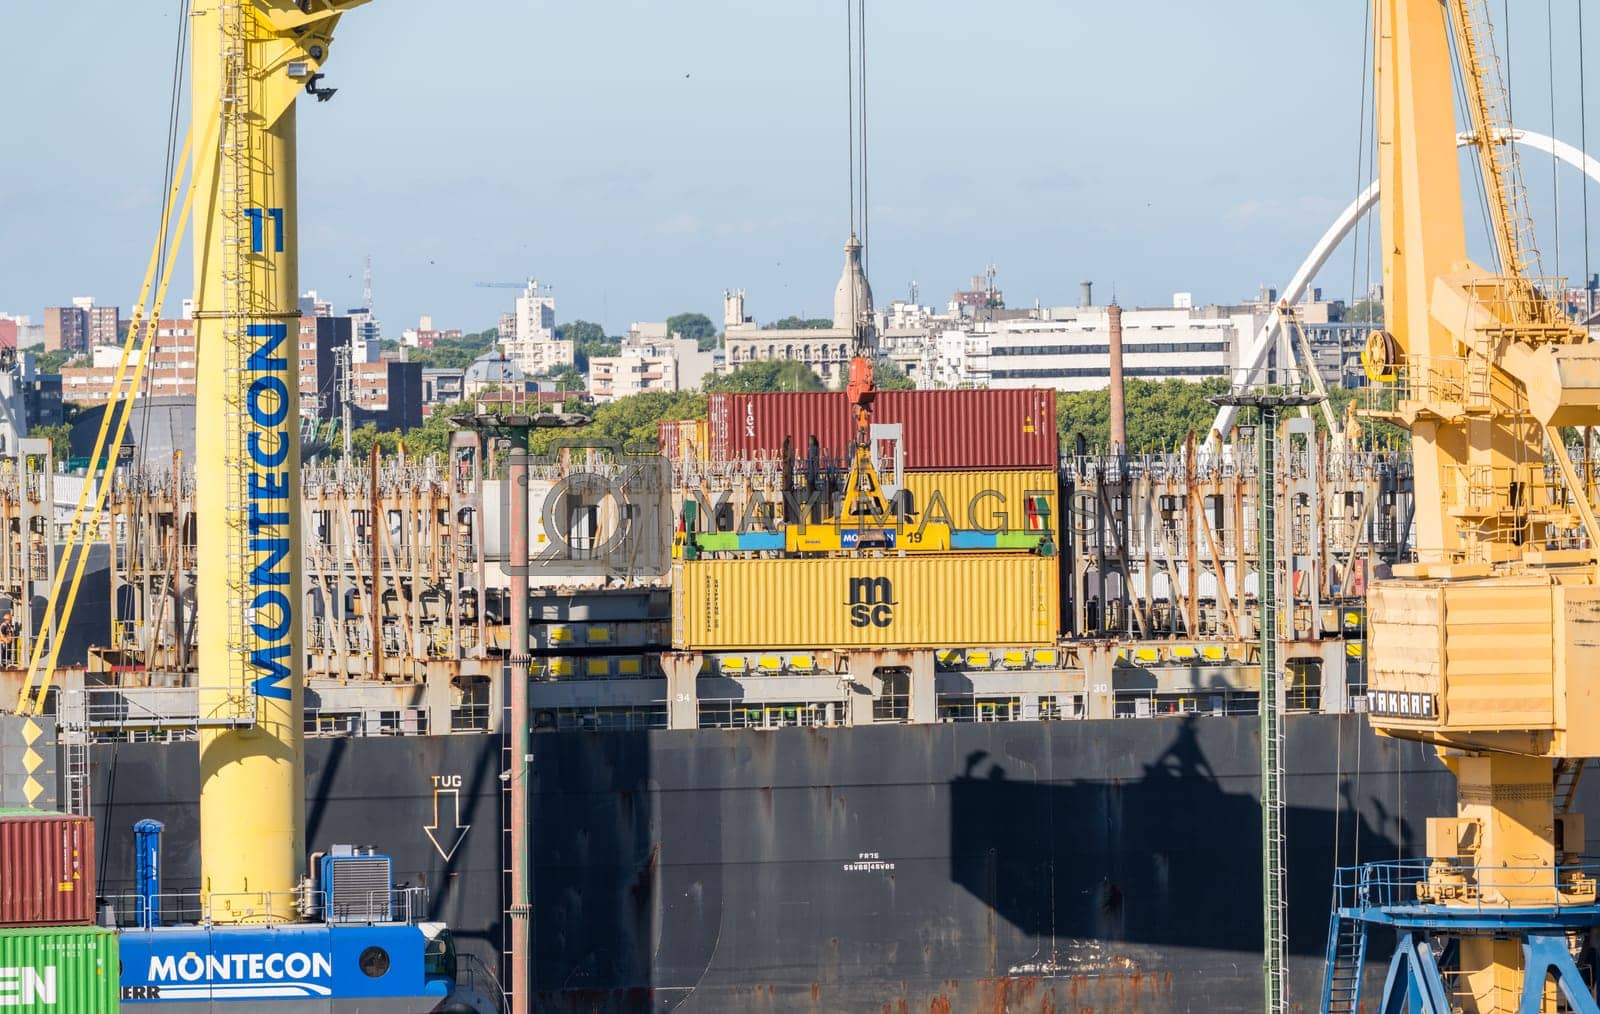 Royalty free image of Containers being loaded onto ship in Montevideo port Uruguay by steheap